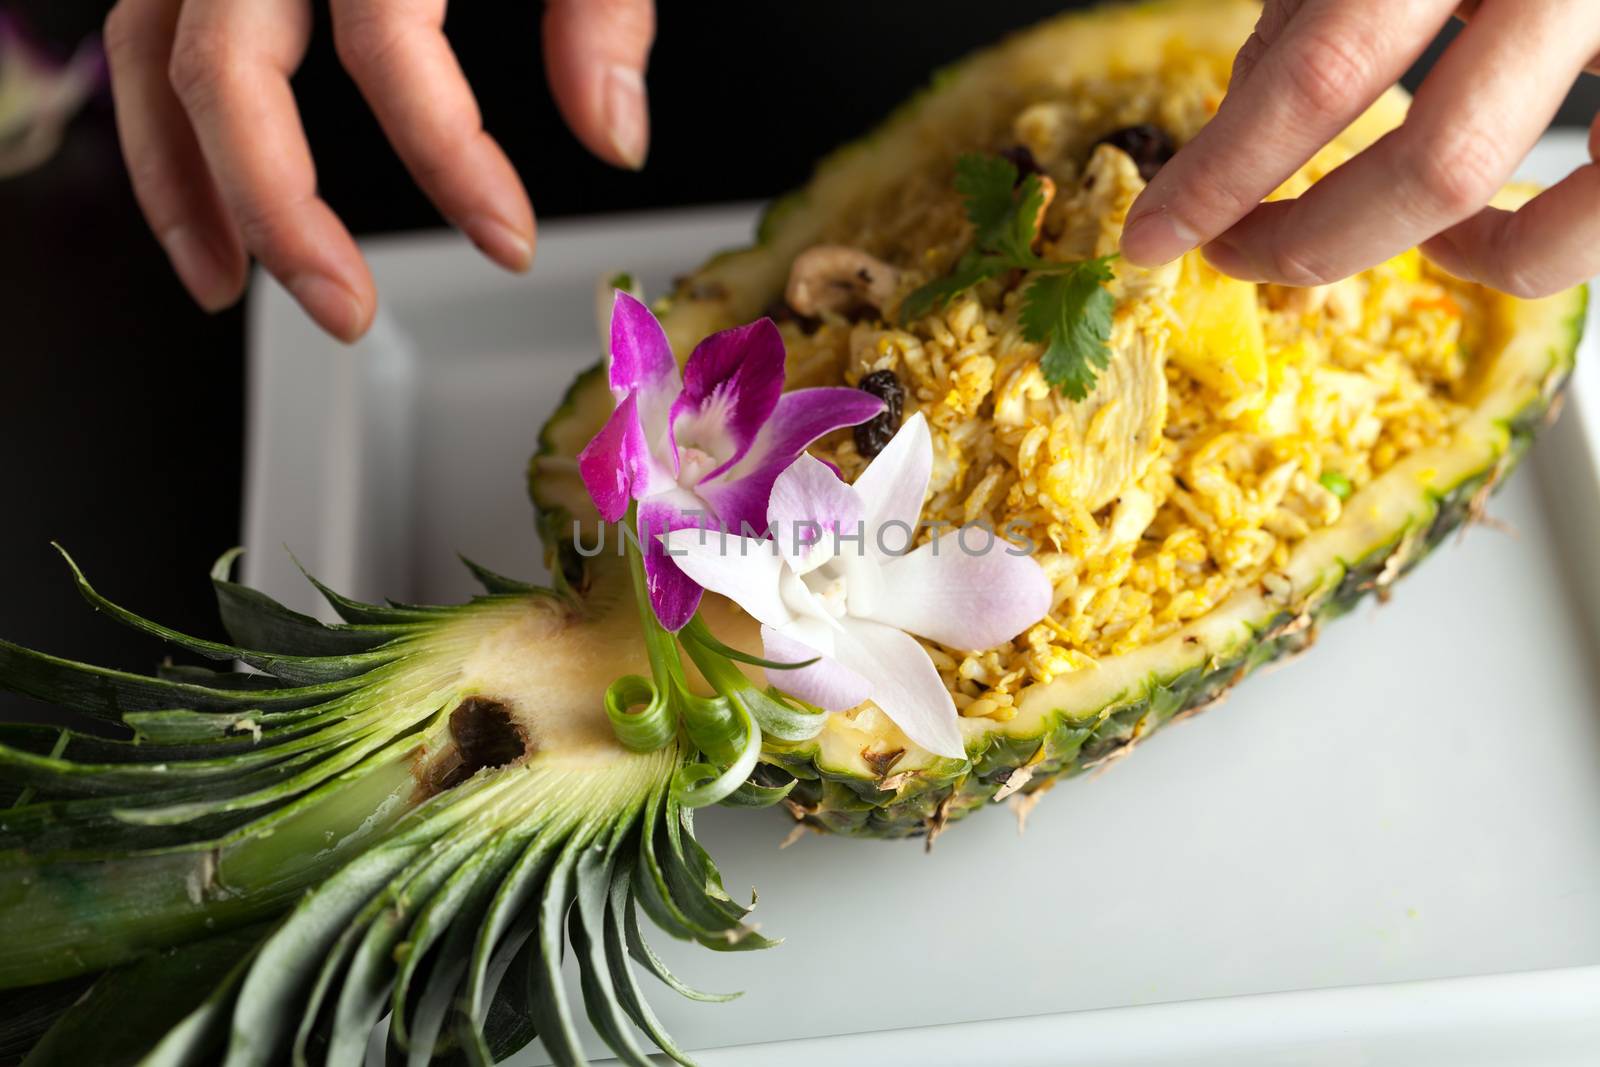 Freshly prepared pineapple fried rice served inside of a pineapple carved like a bowl. Food stylish is arranging garnish.